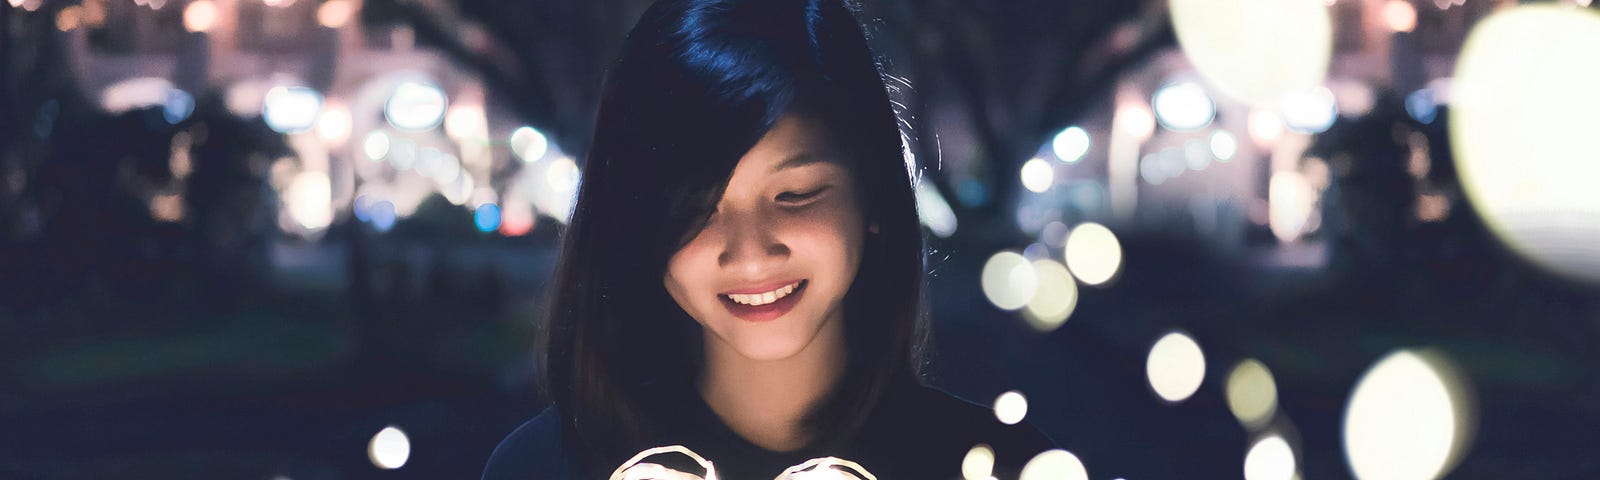 A young woman with a smile on her face holding a lit heart, surrounded by small lights